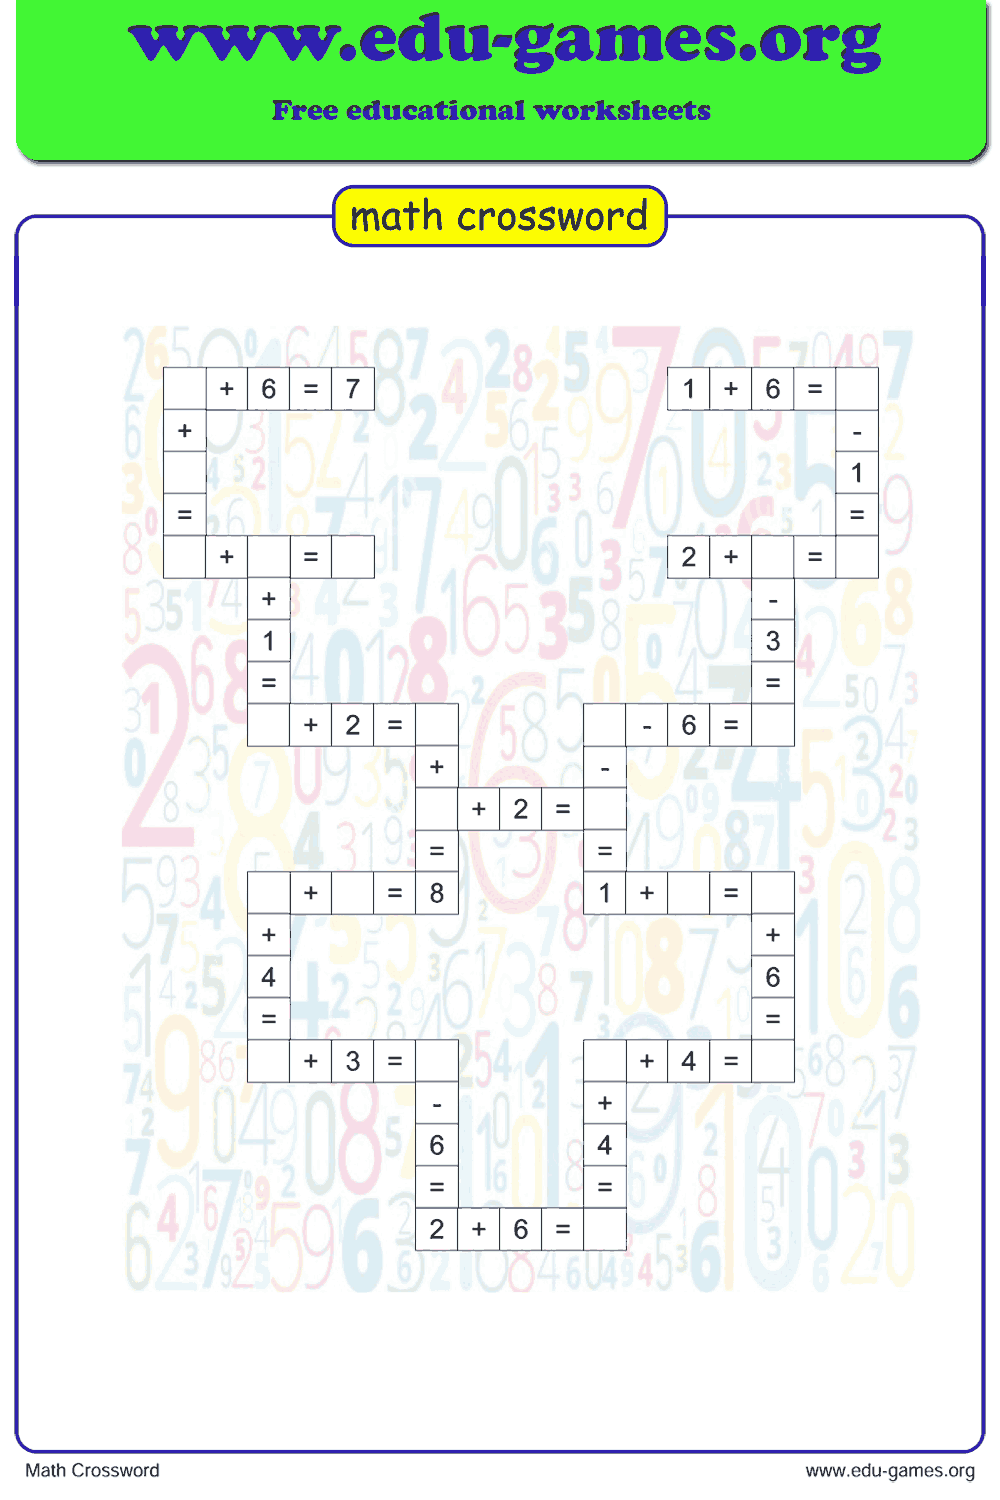 How To Make Crossword Puzzles Printable Free